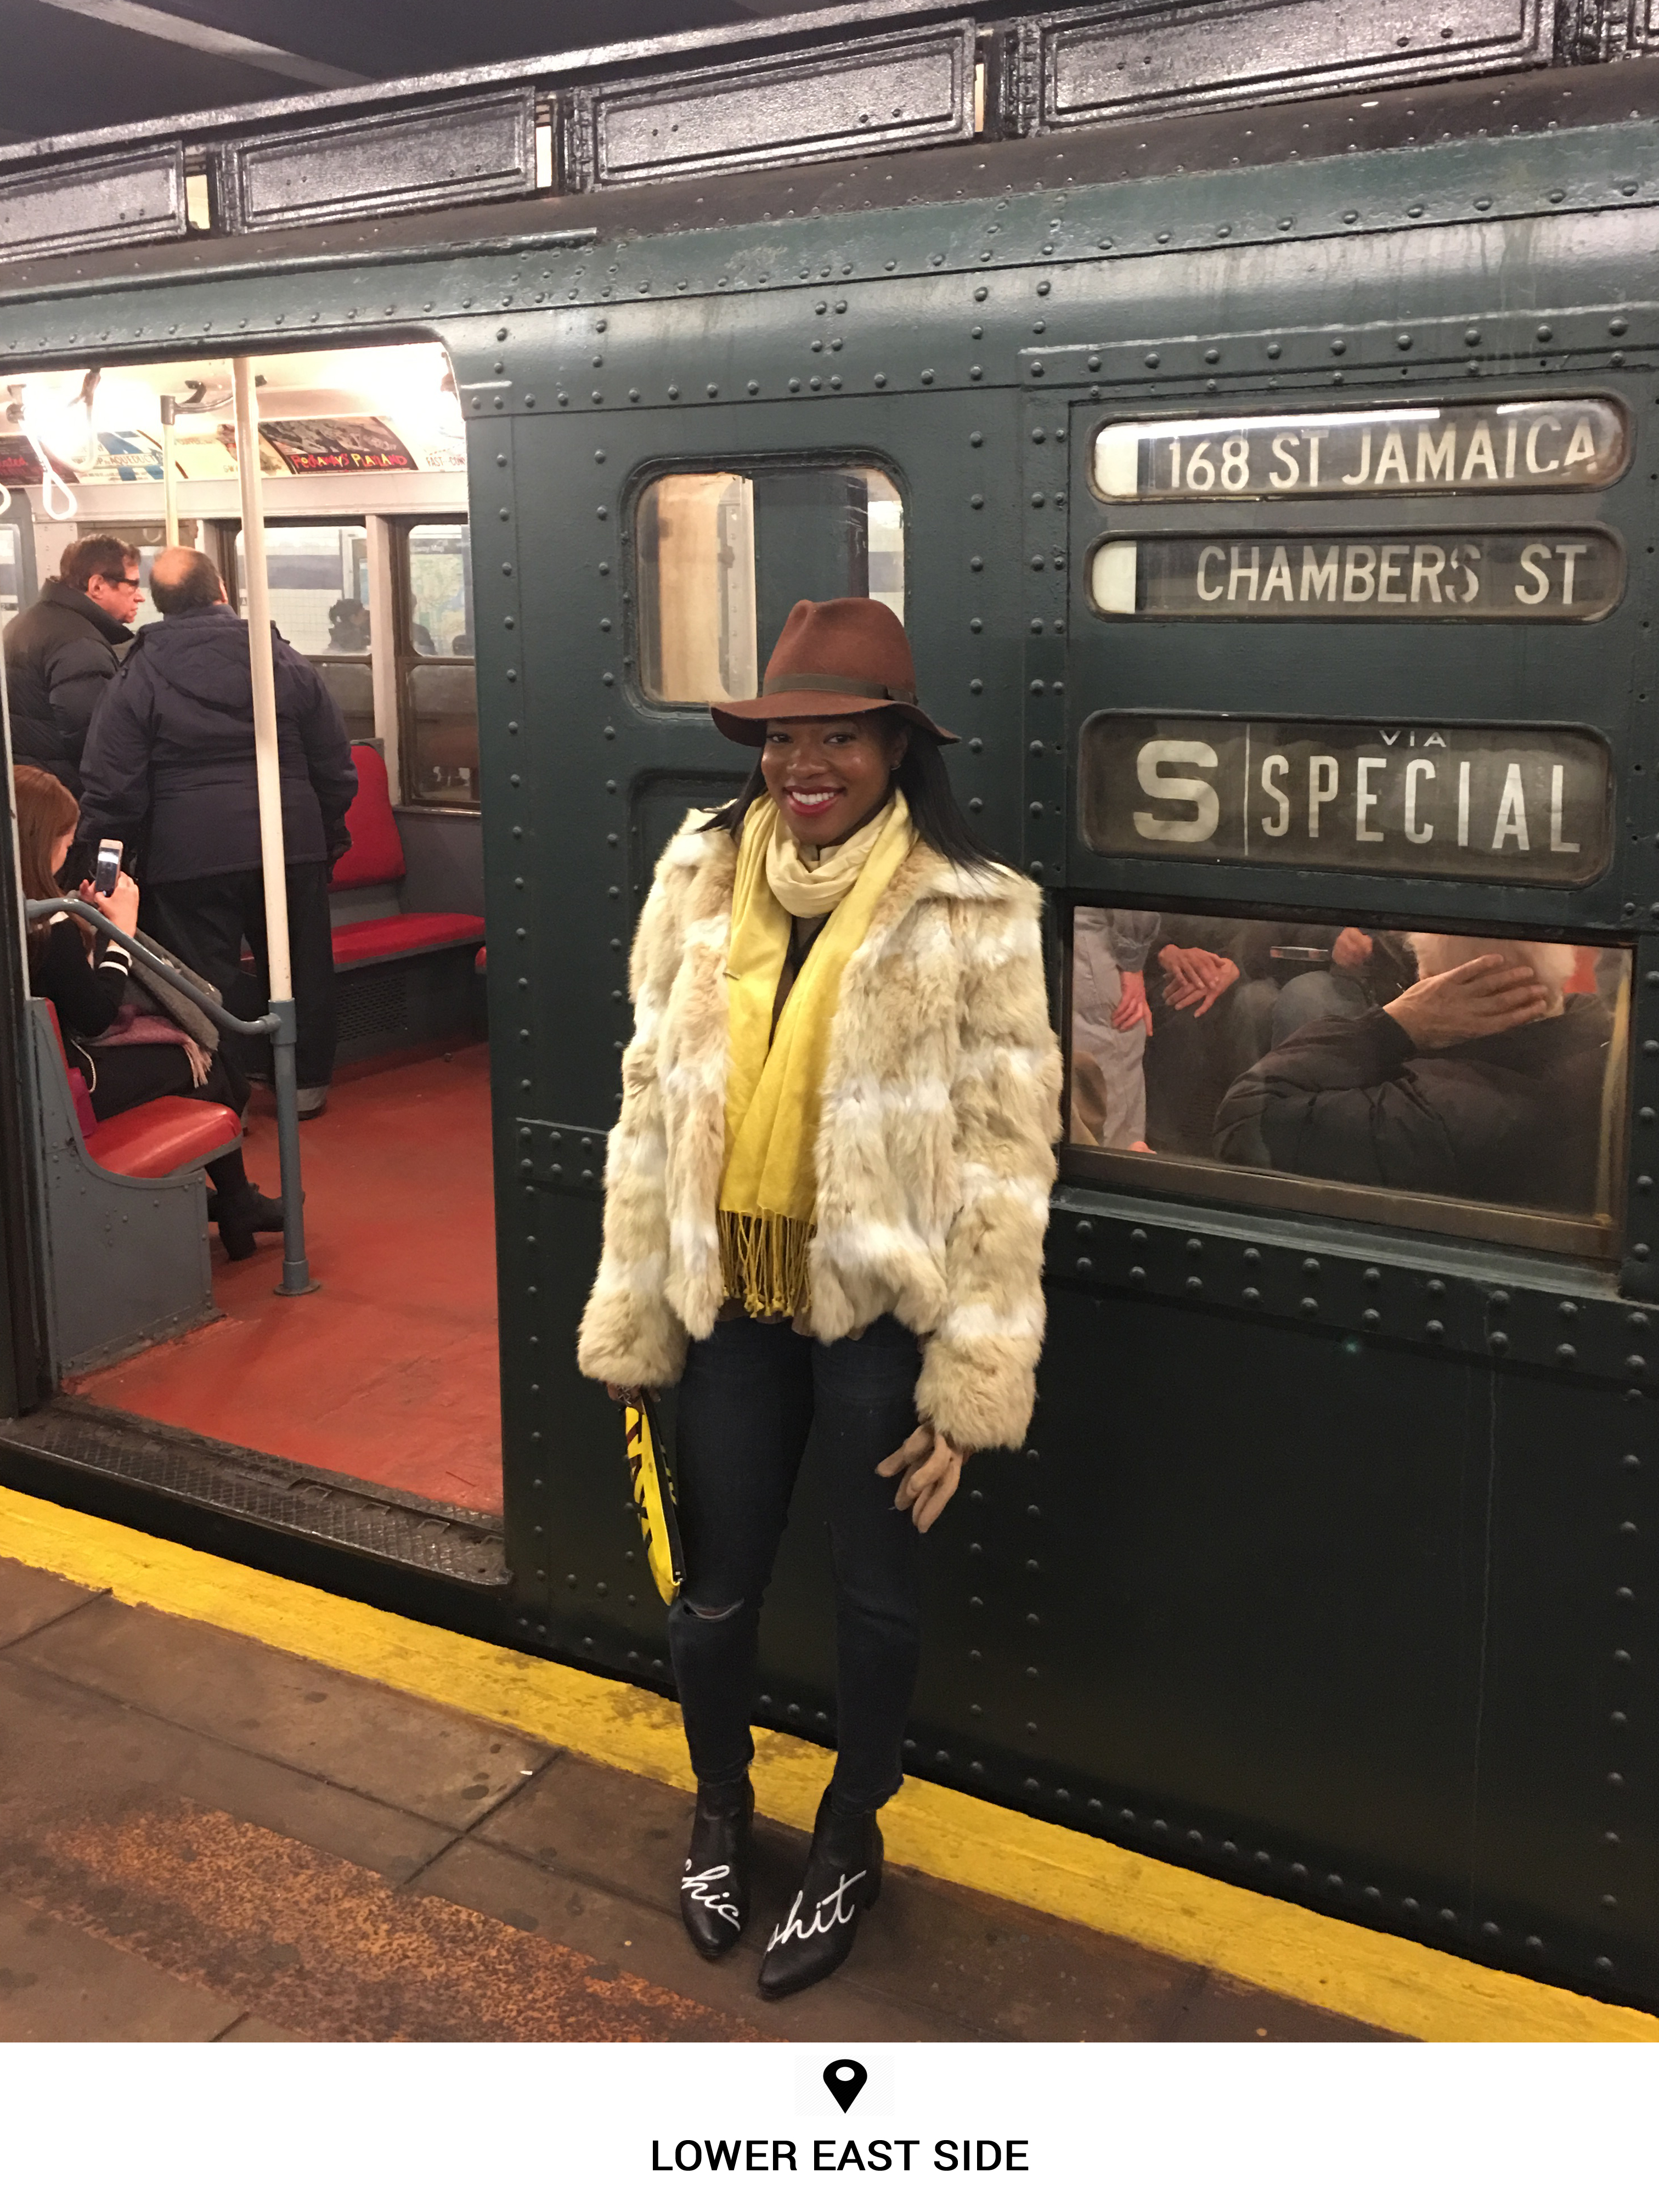 Take a Ride on These Vintage New York Trains